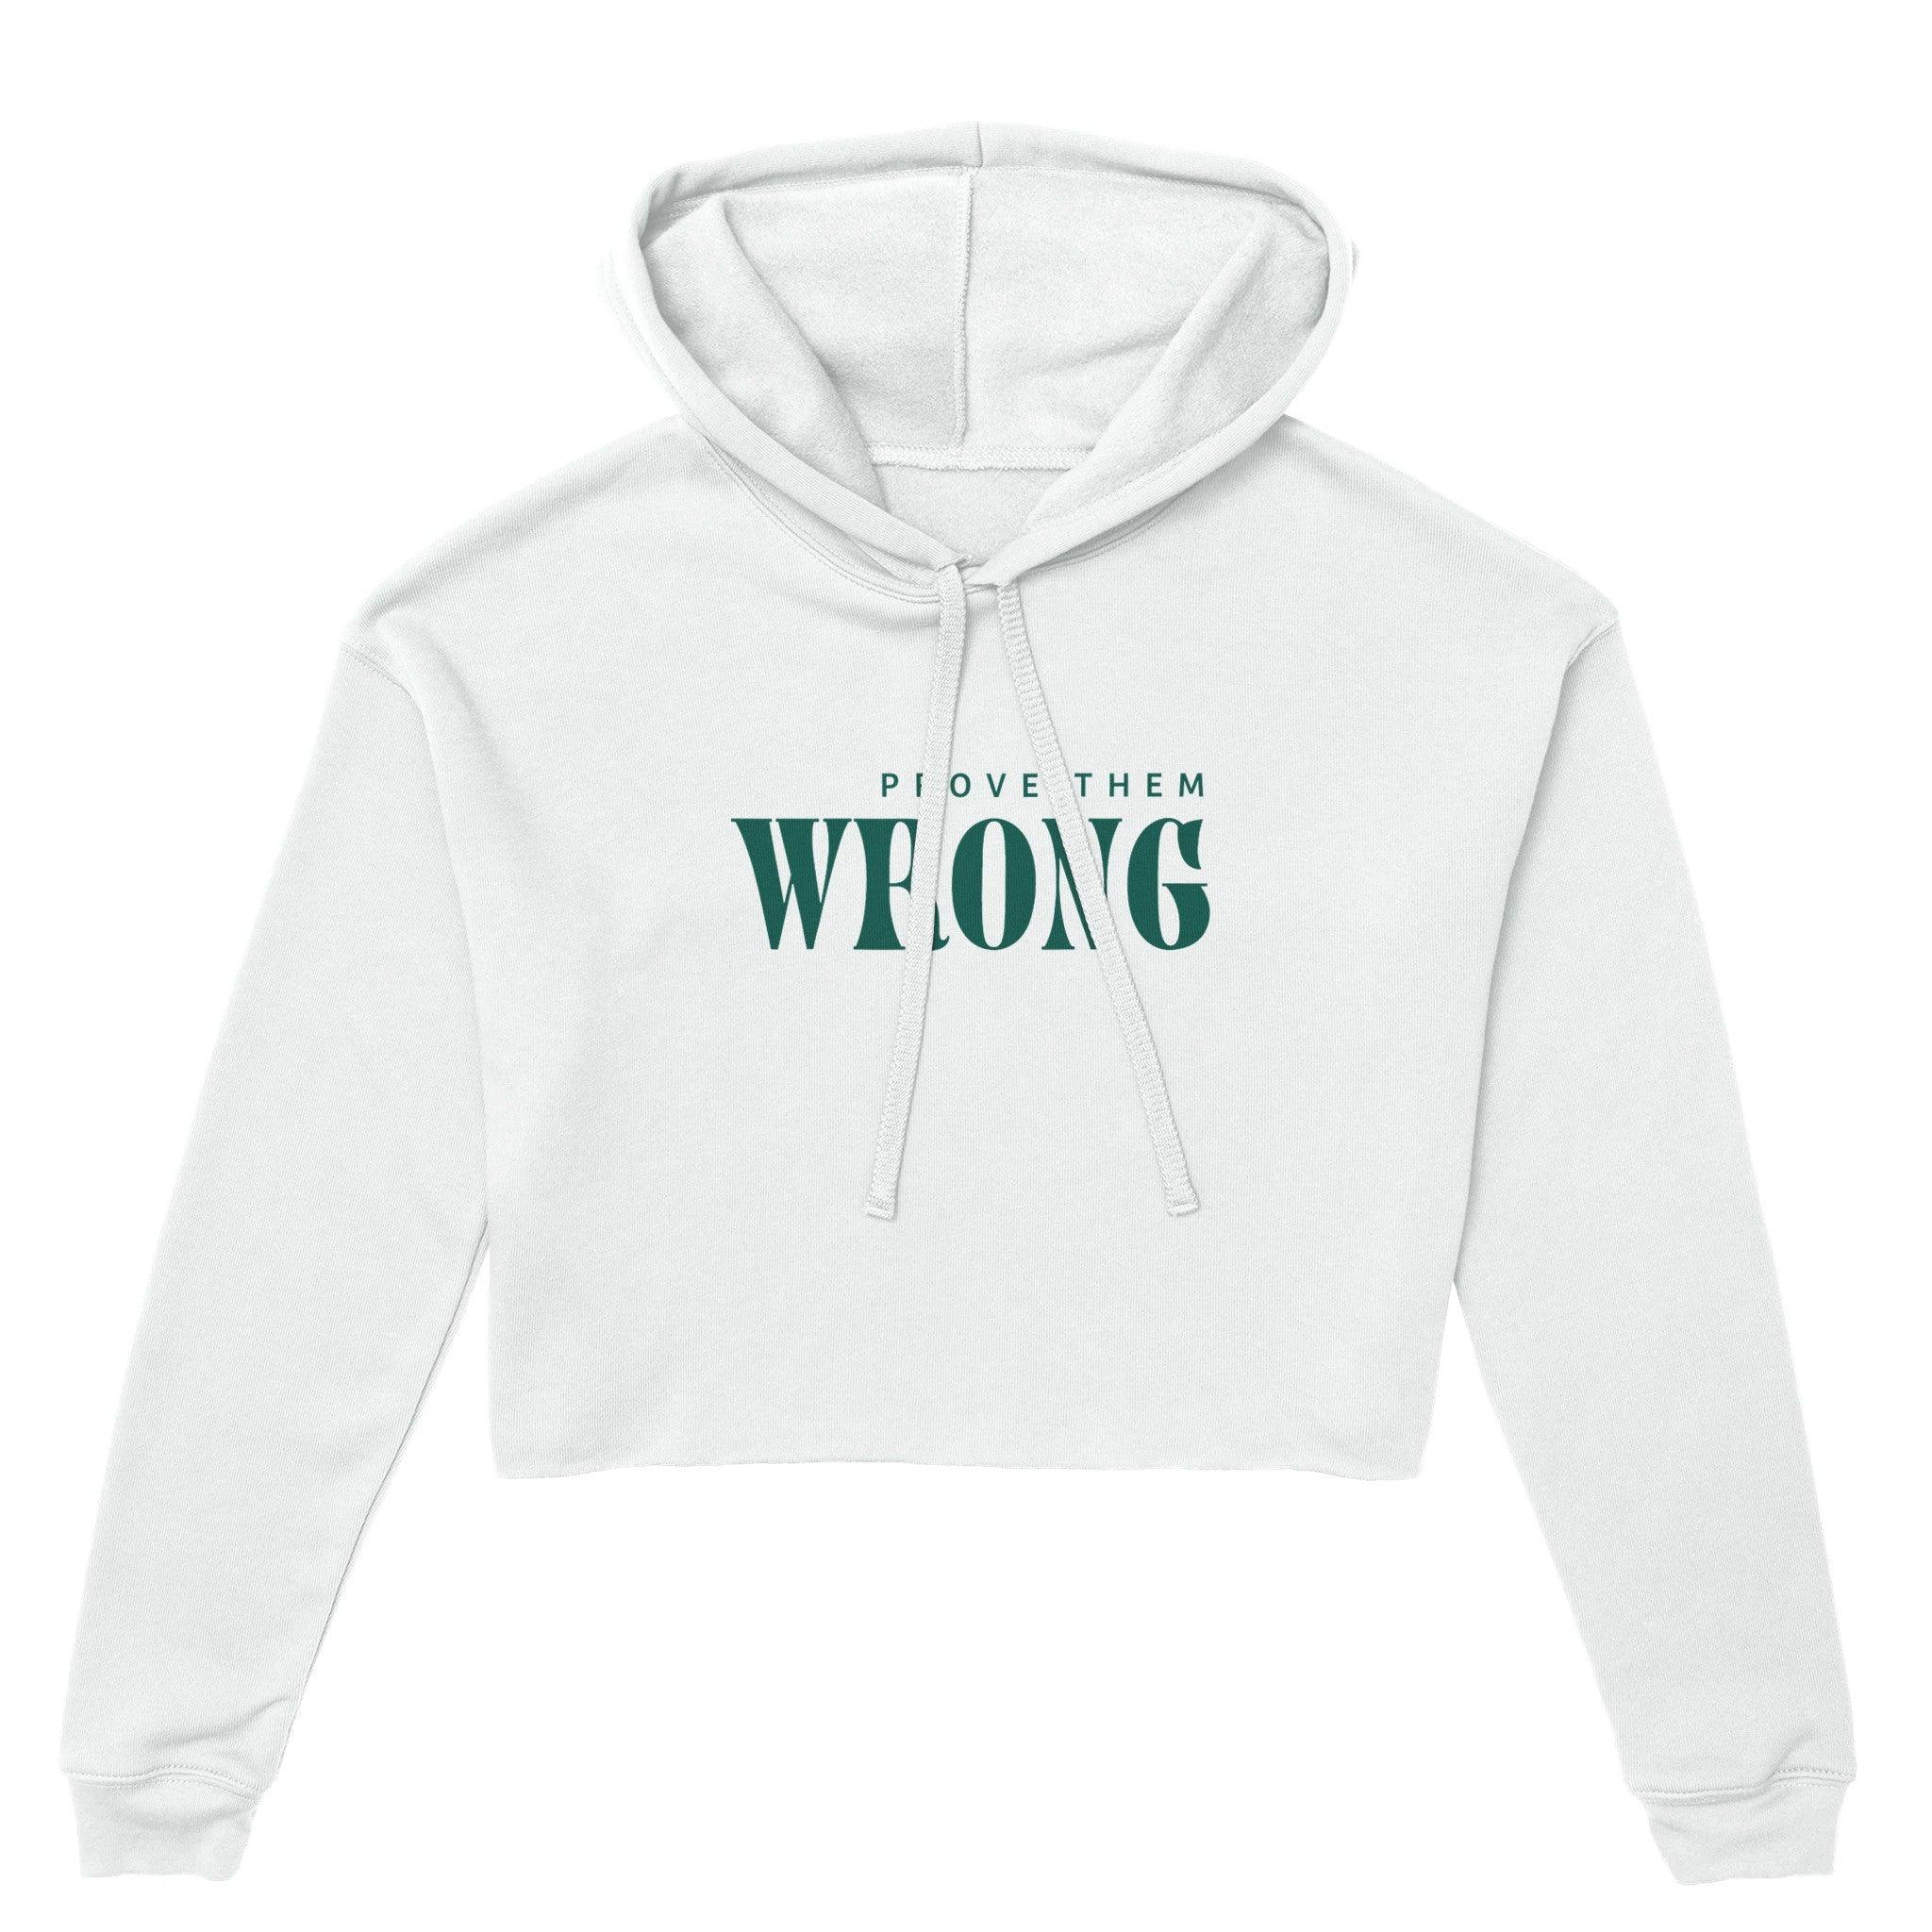 'Prove them wrong' Cropped Hoodie - POMA